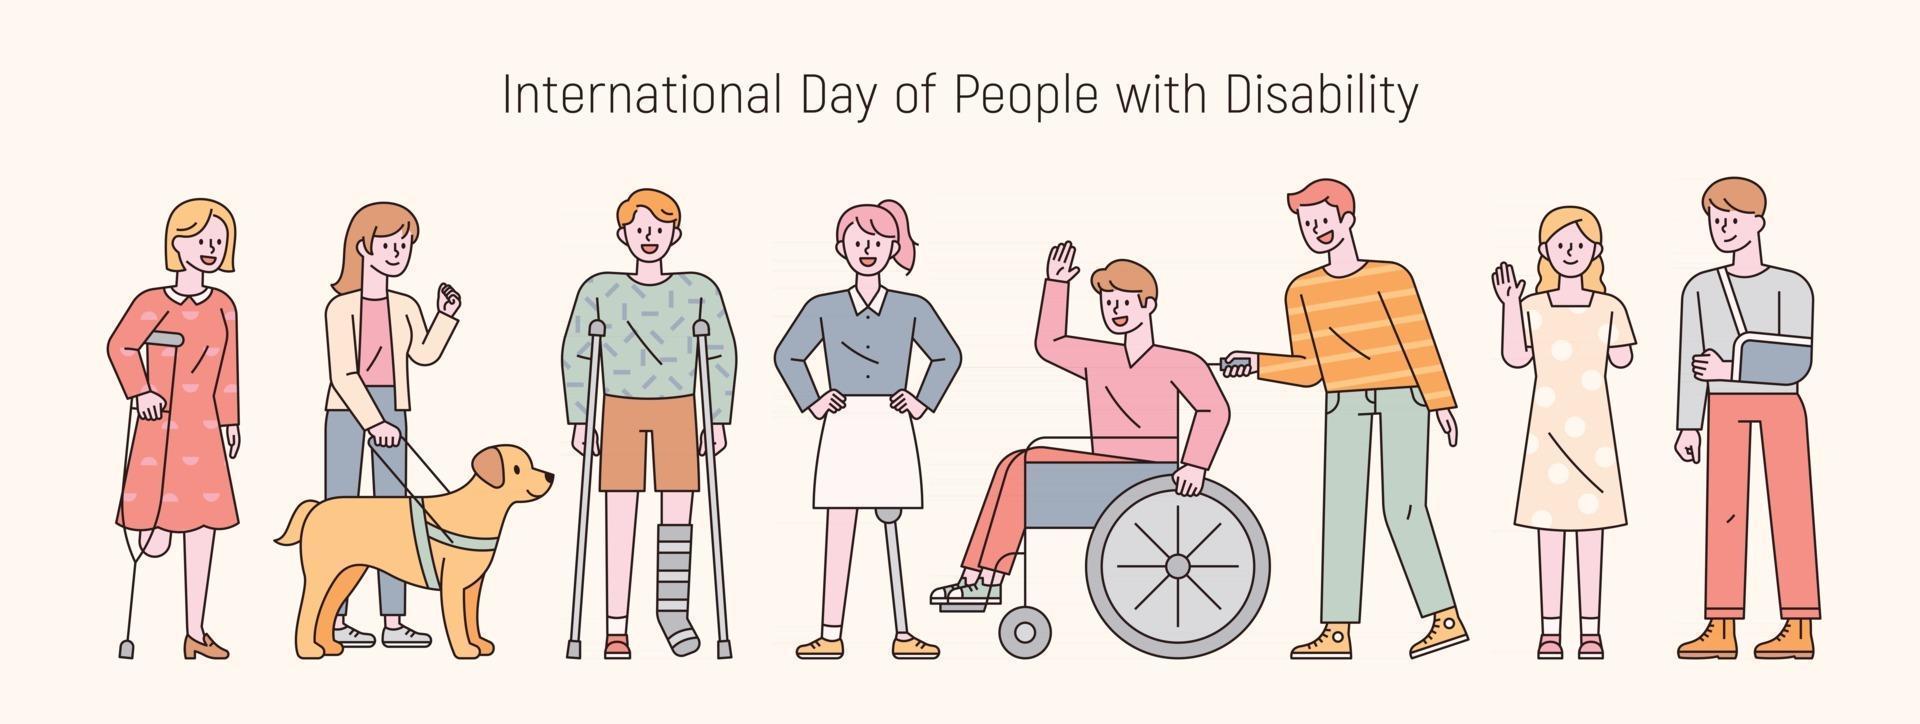 International day of people with disability. flat design style minimal vector illustration.